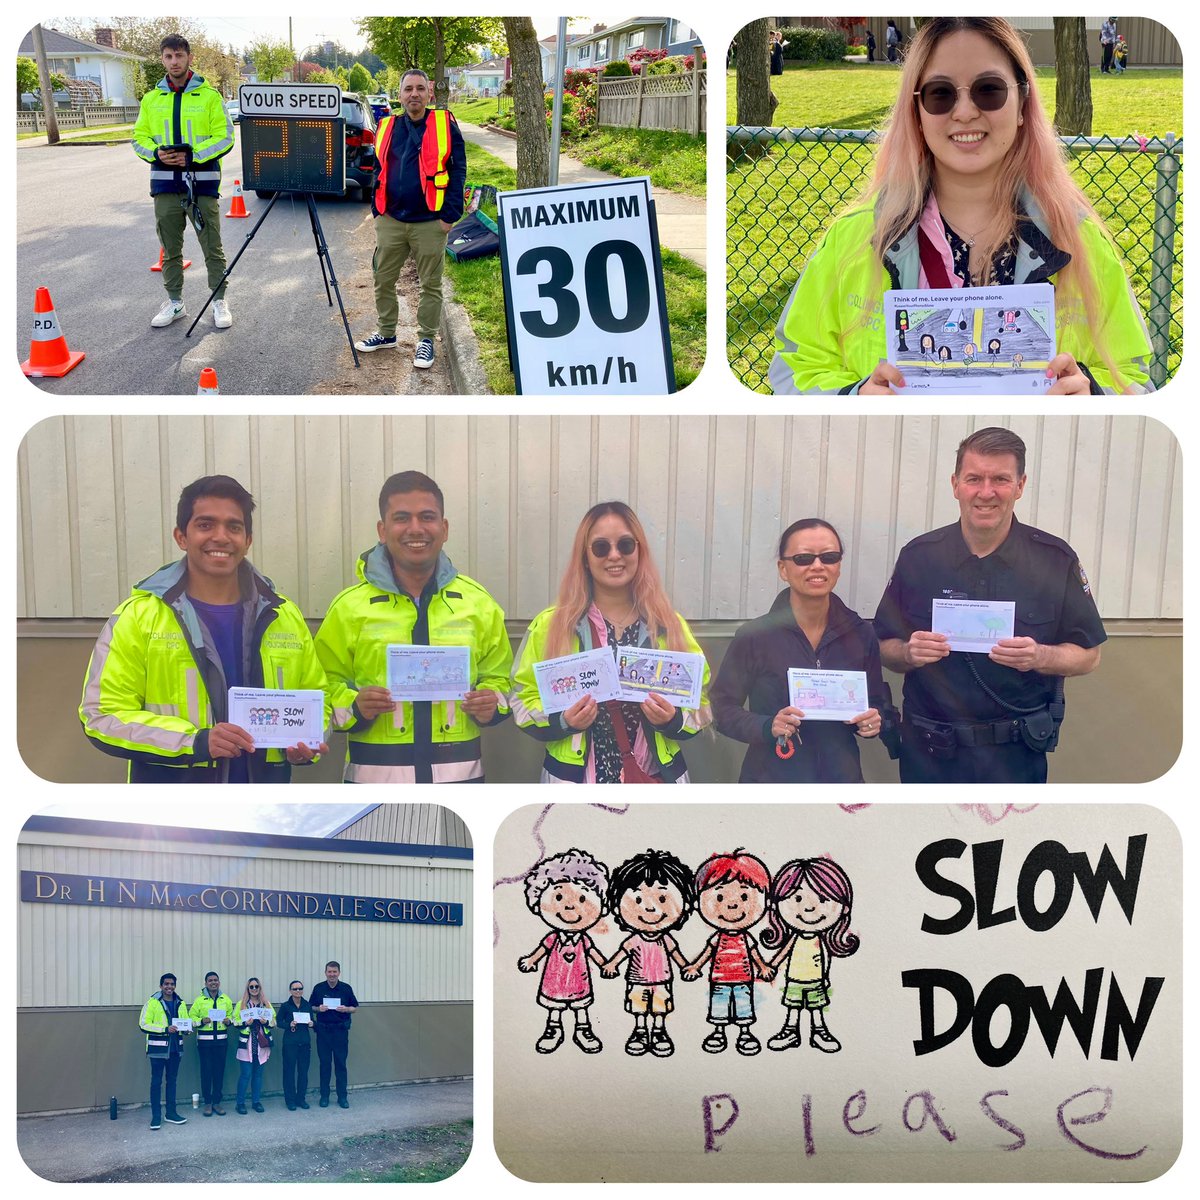 Happening now: We're @CollingwoodCPC @CollingwoodcpcC @VancouverPD Speed Watch Volunteers and @VPDTrafficUnit CREST @MacCork39School @CityofVancouver reminding motorists to think of the kids @VSB39, slow down #NoNeedForSpeed @icbc